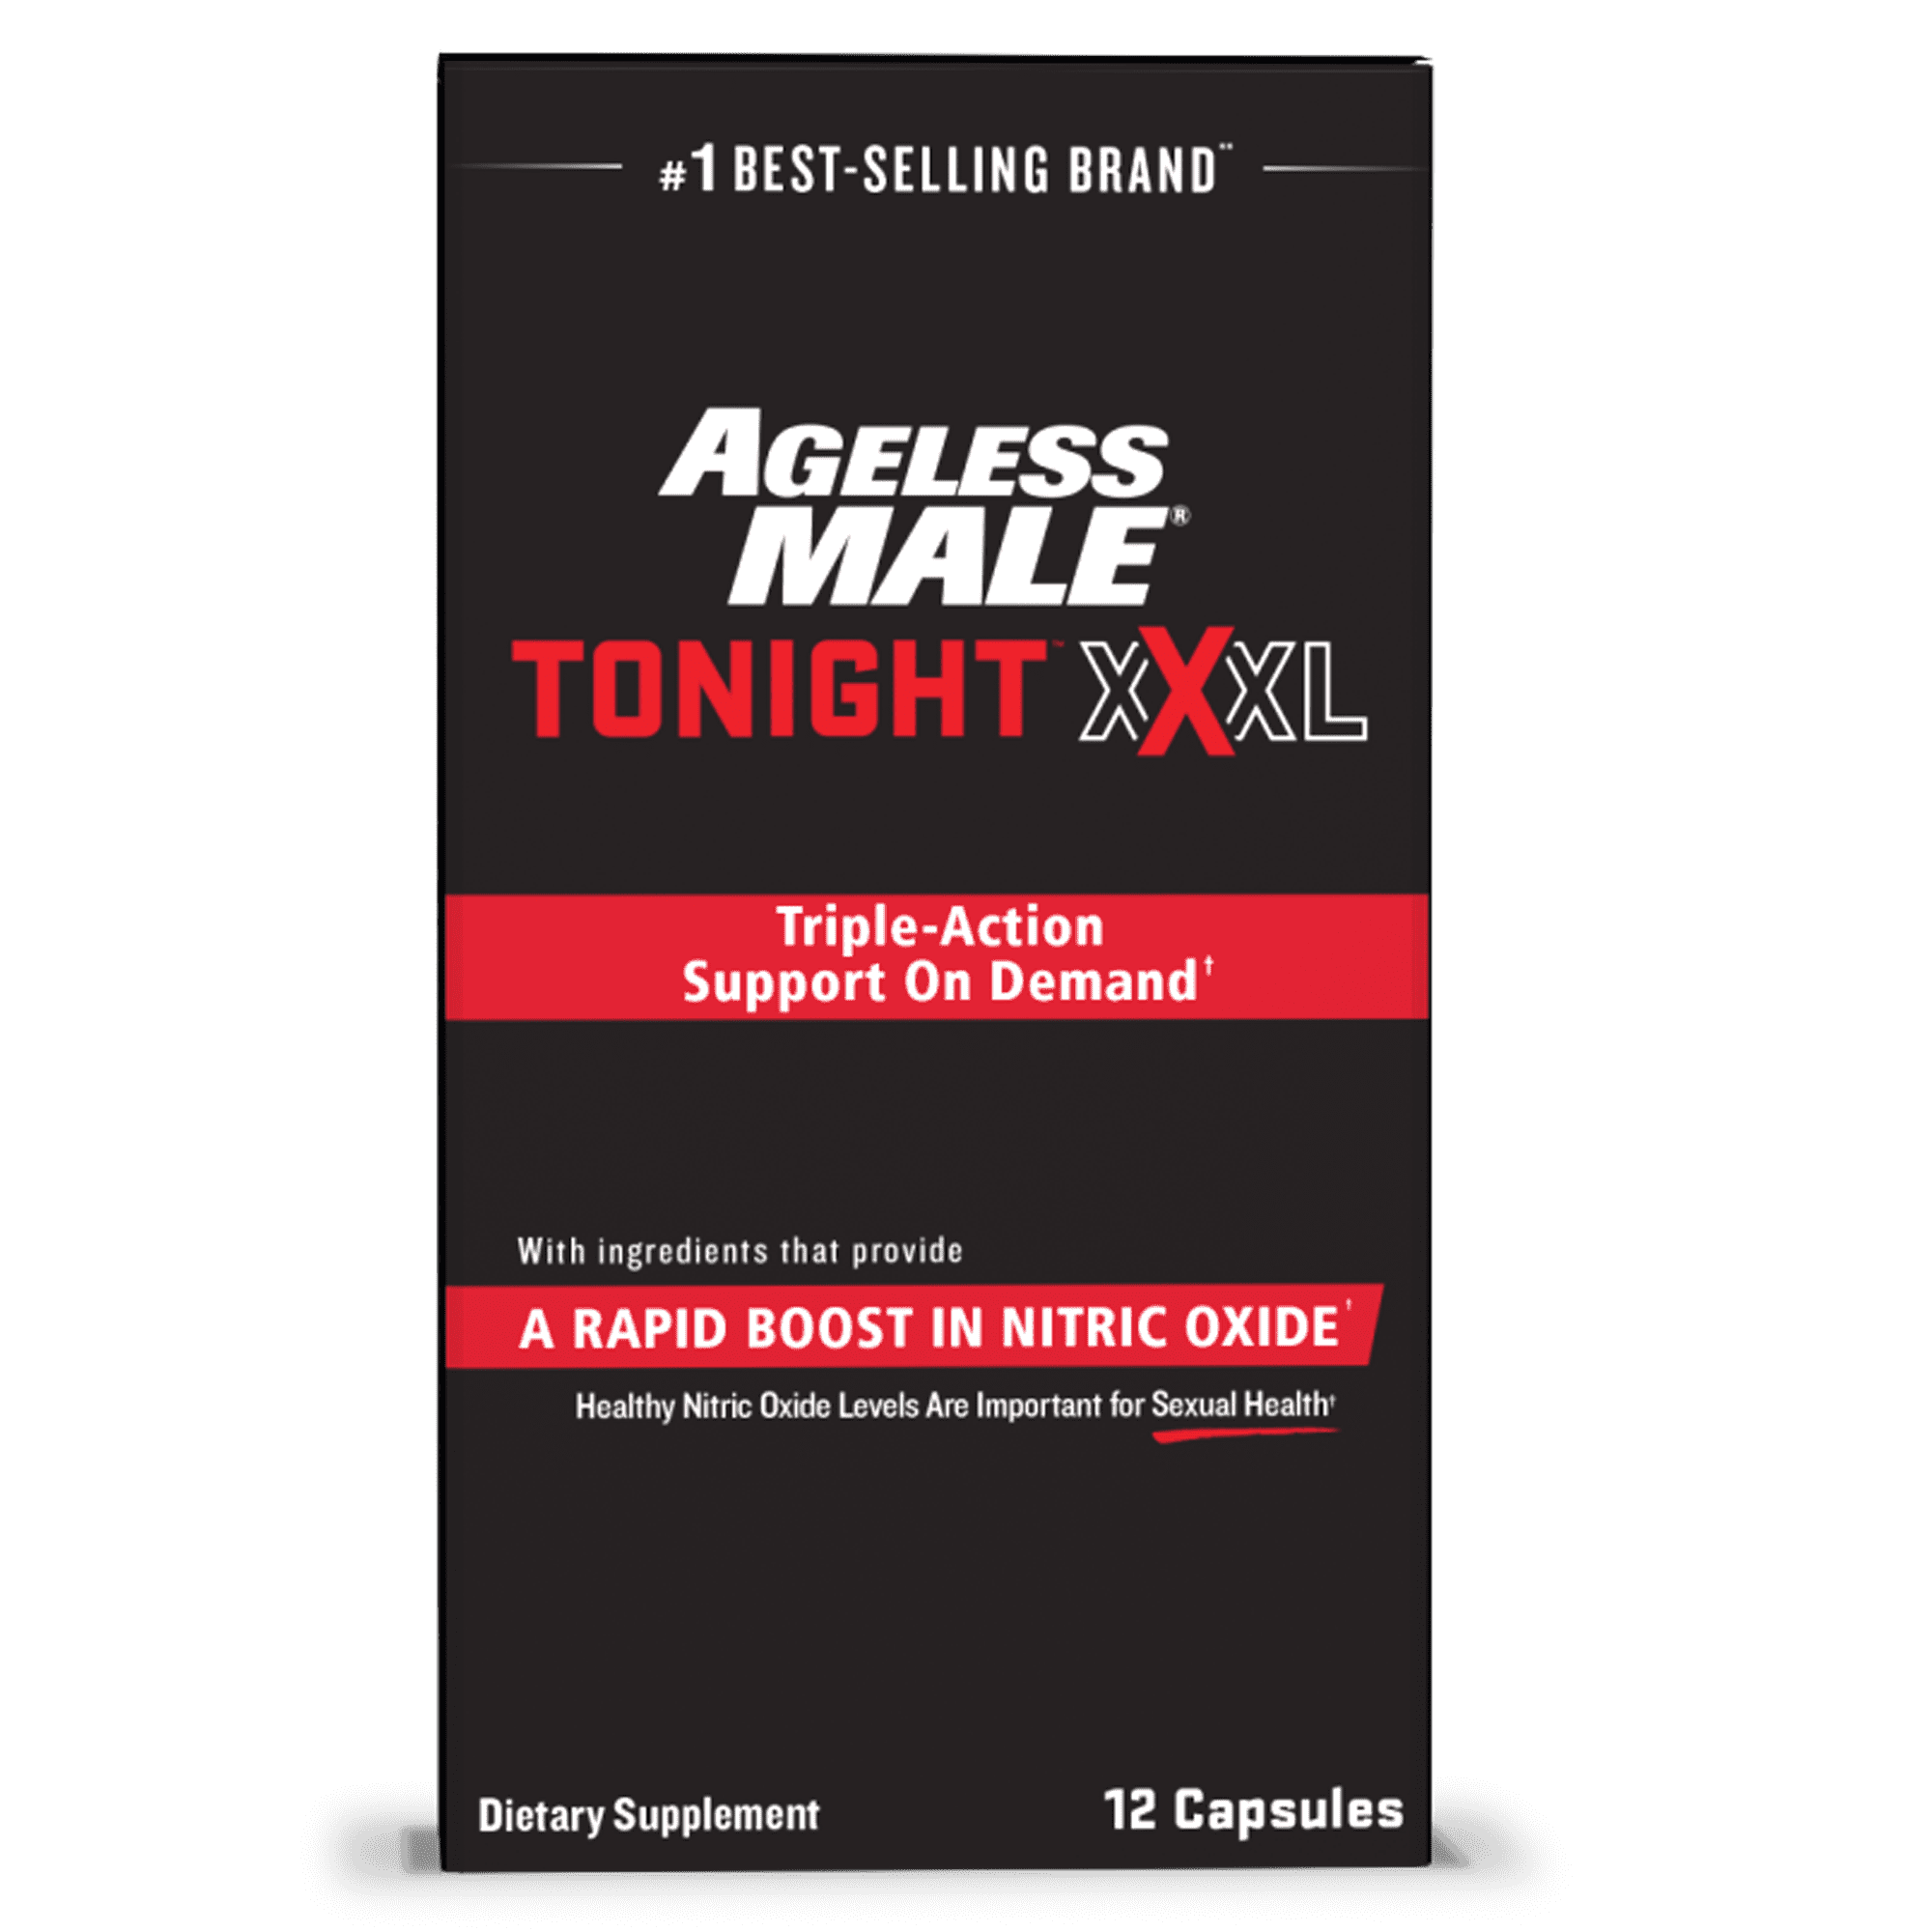 Ageless Male Tonight XXXL Nitric Oxide Booster Supplement, Male Performance Enhancers, 12 Capsules